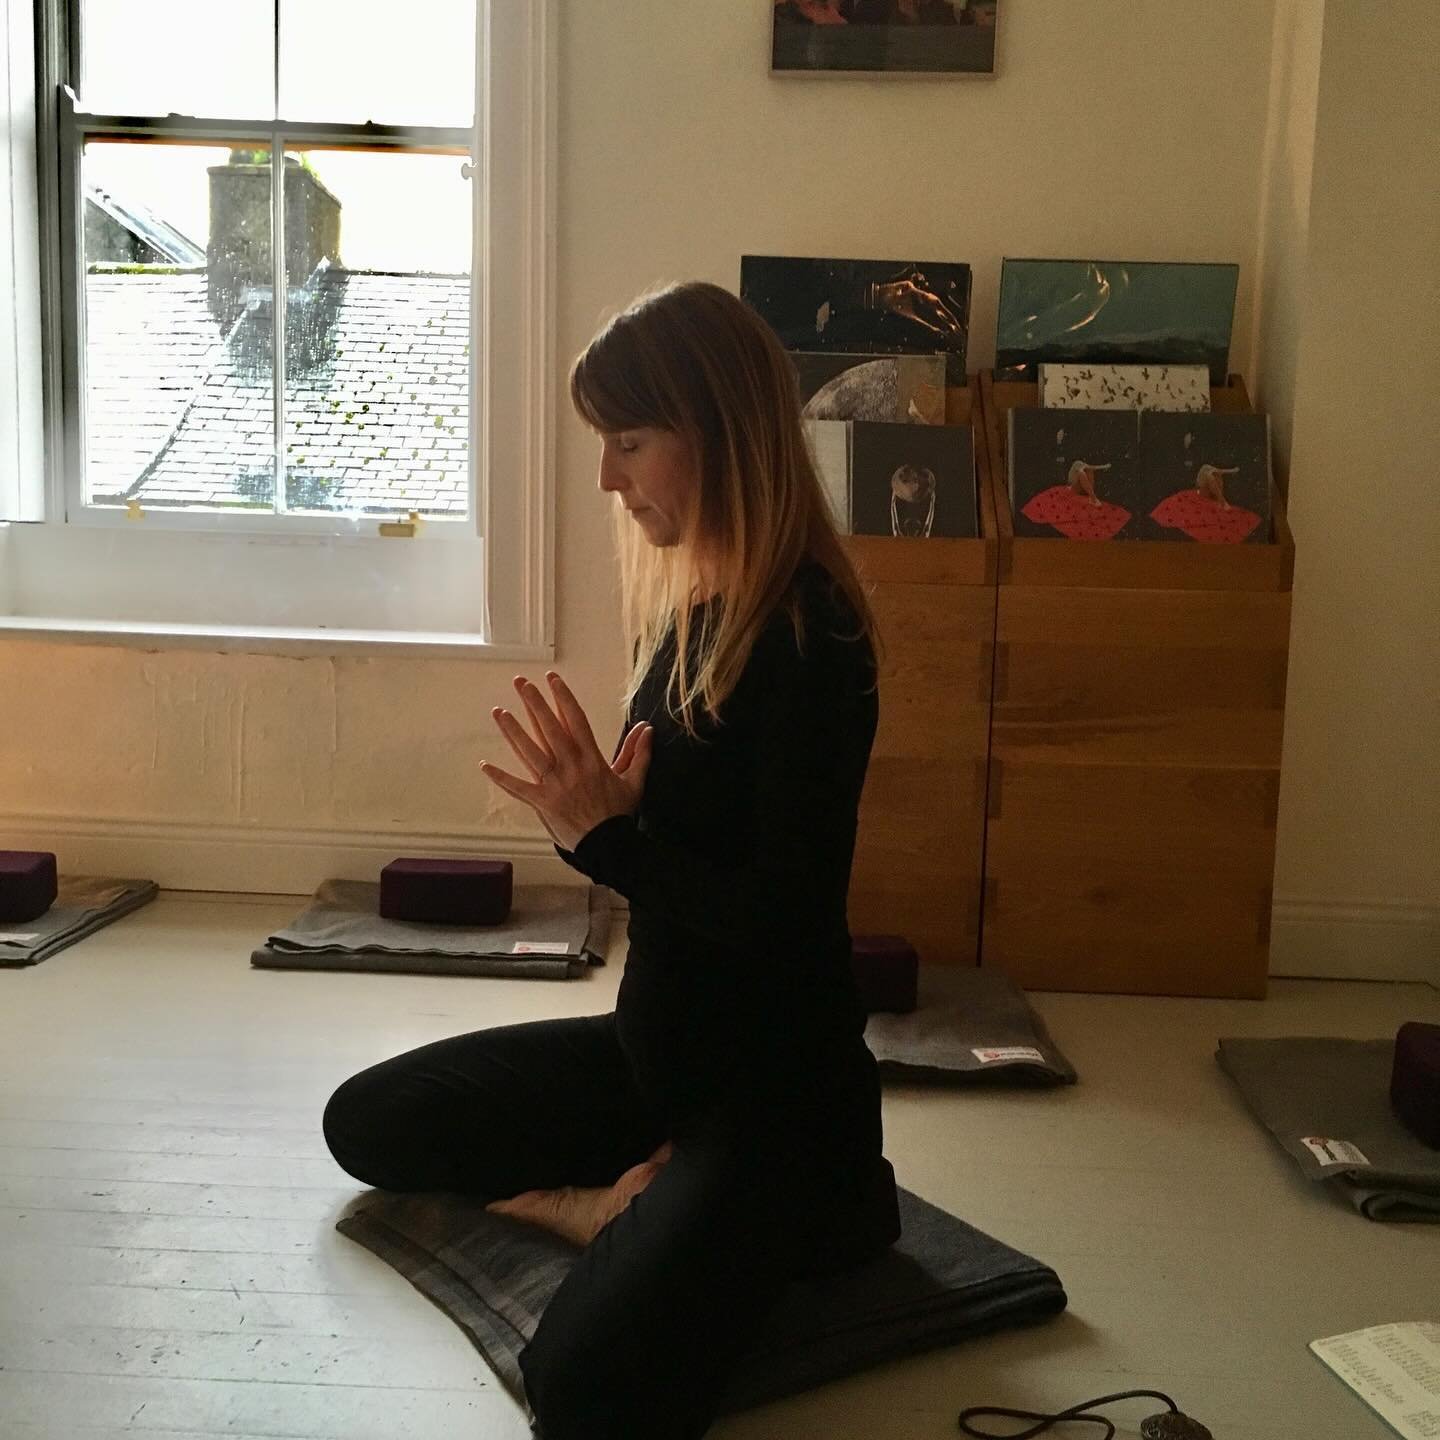 Ease inwards, savouring slower moments and movements.

Textures of Yoga
Weaving philosophy, practice and peace

✨When: Sat March 2nd 9:00-10:00
✨Where: Coffeewerk and Press Yoga + Breakfast Or join us from the comfort of your home via LIVESTREAM

Do 